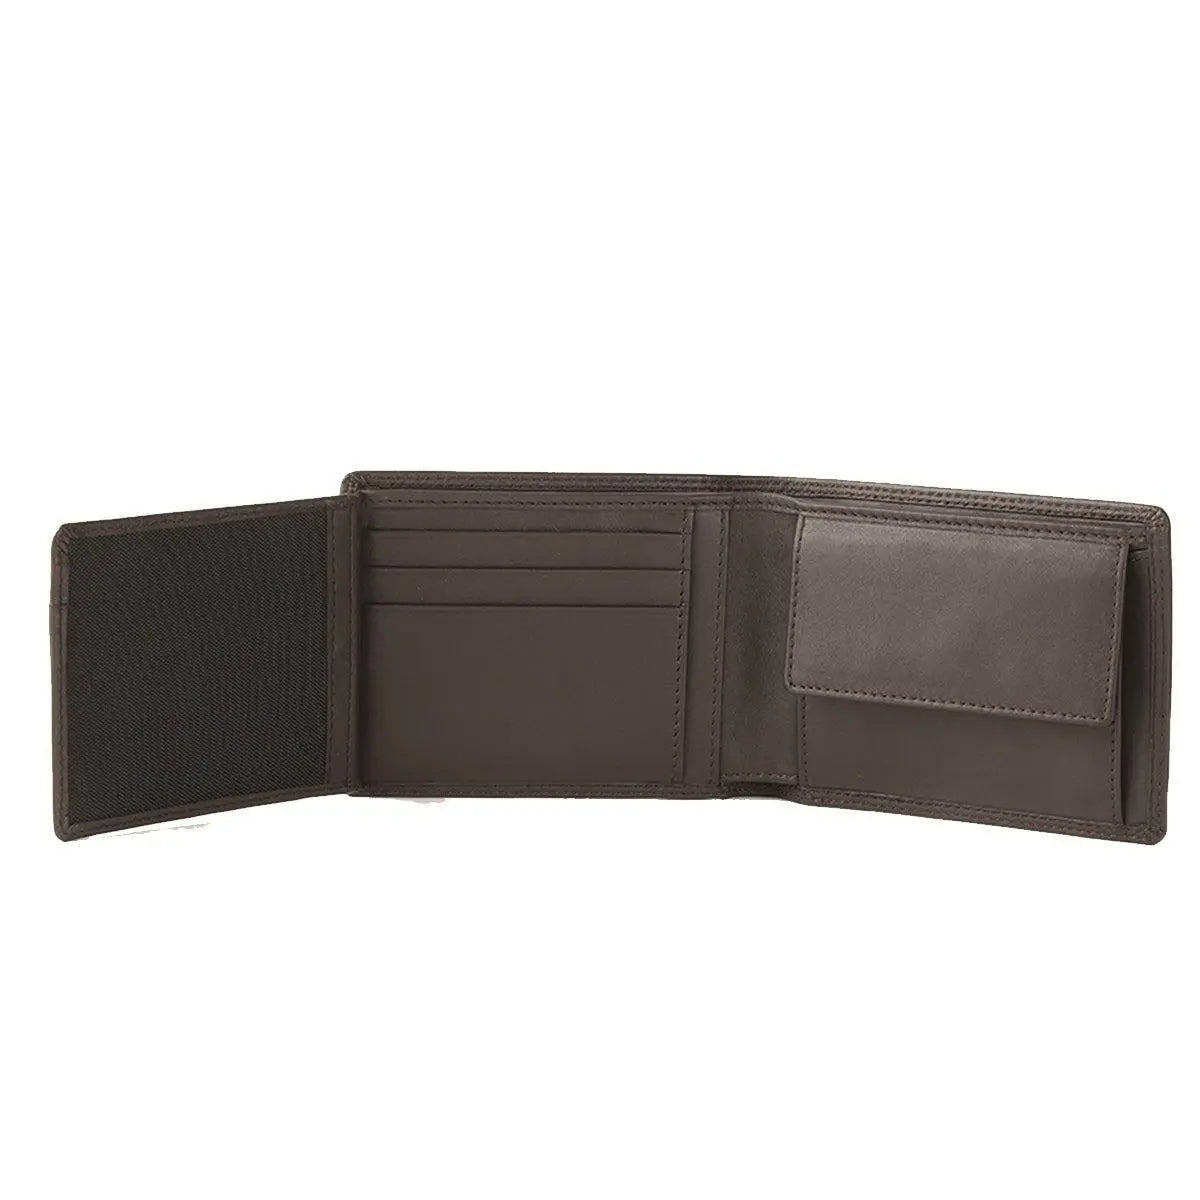 Mens / Gents Tri-Fold Leather Wallet / Coin Holder with Key Chain | eBay